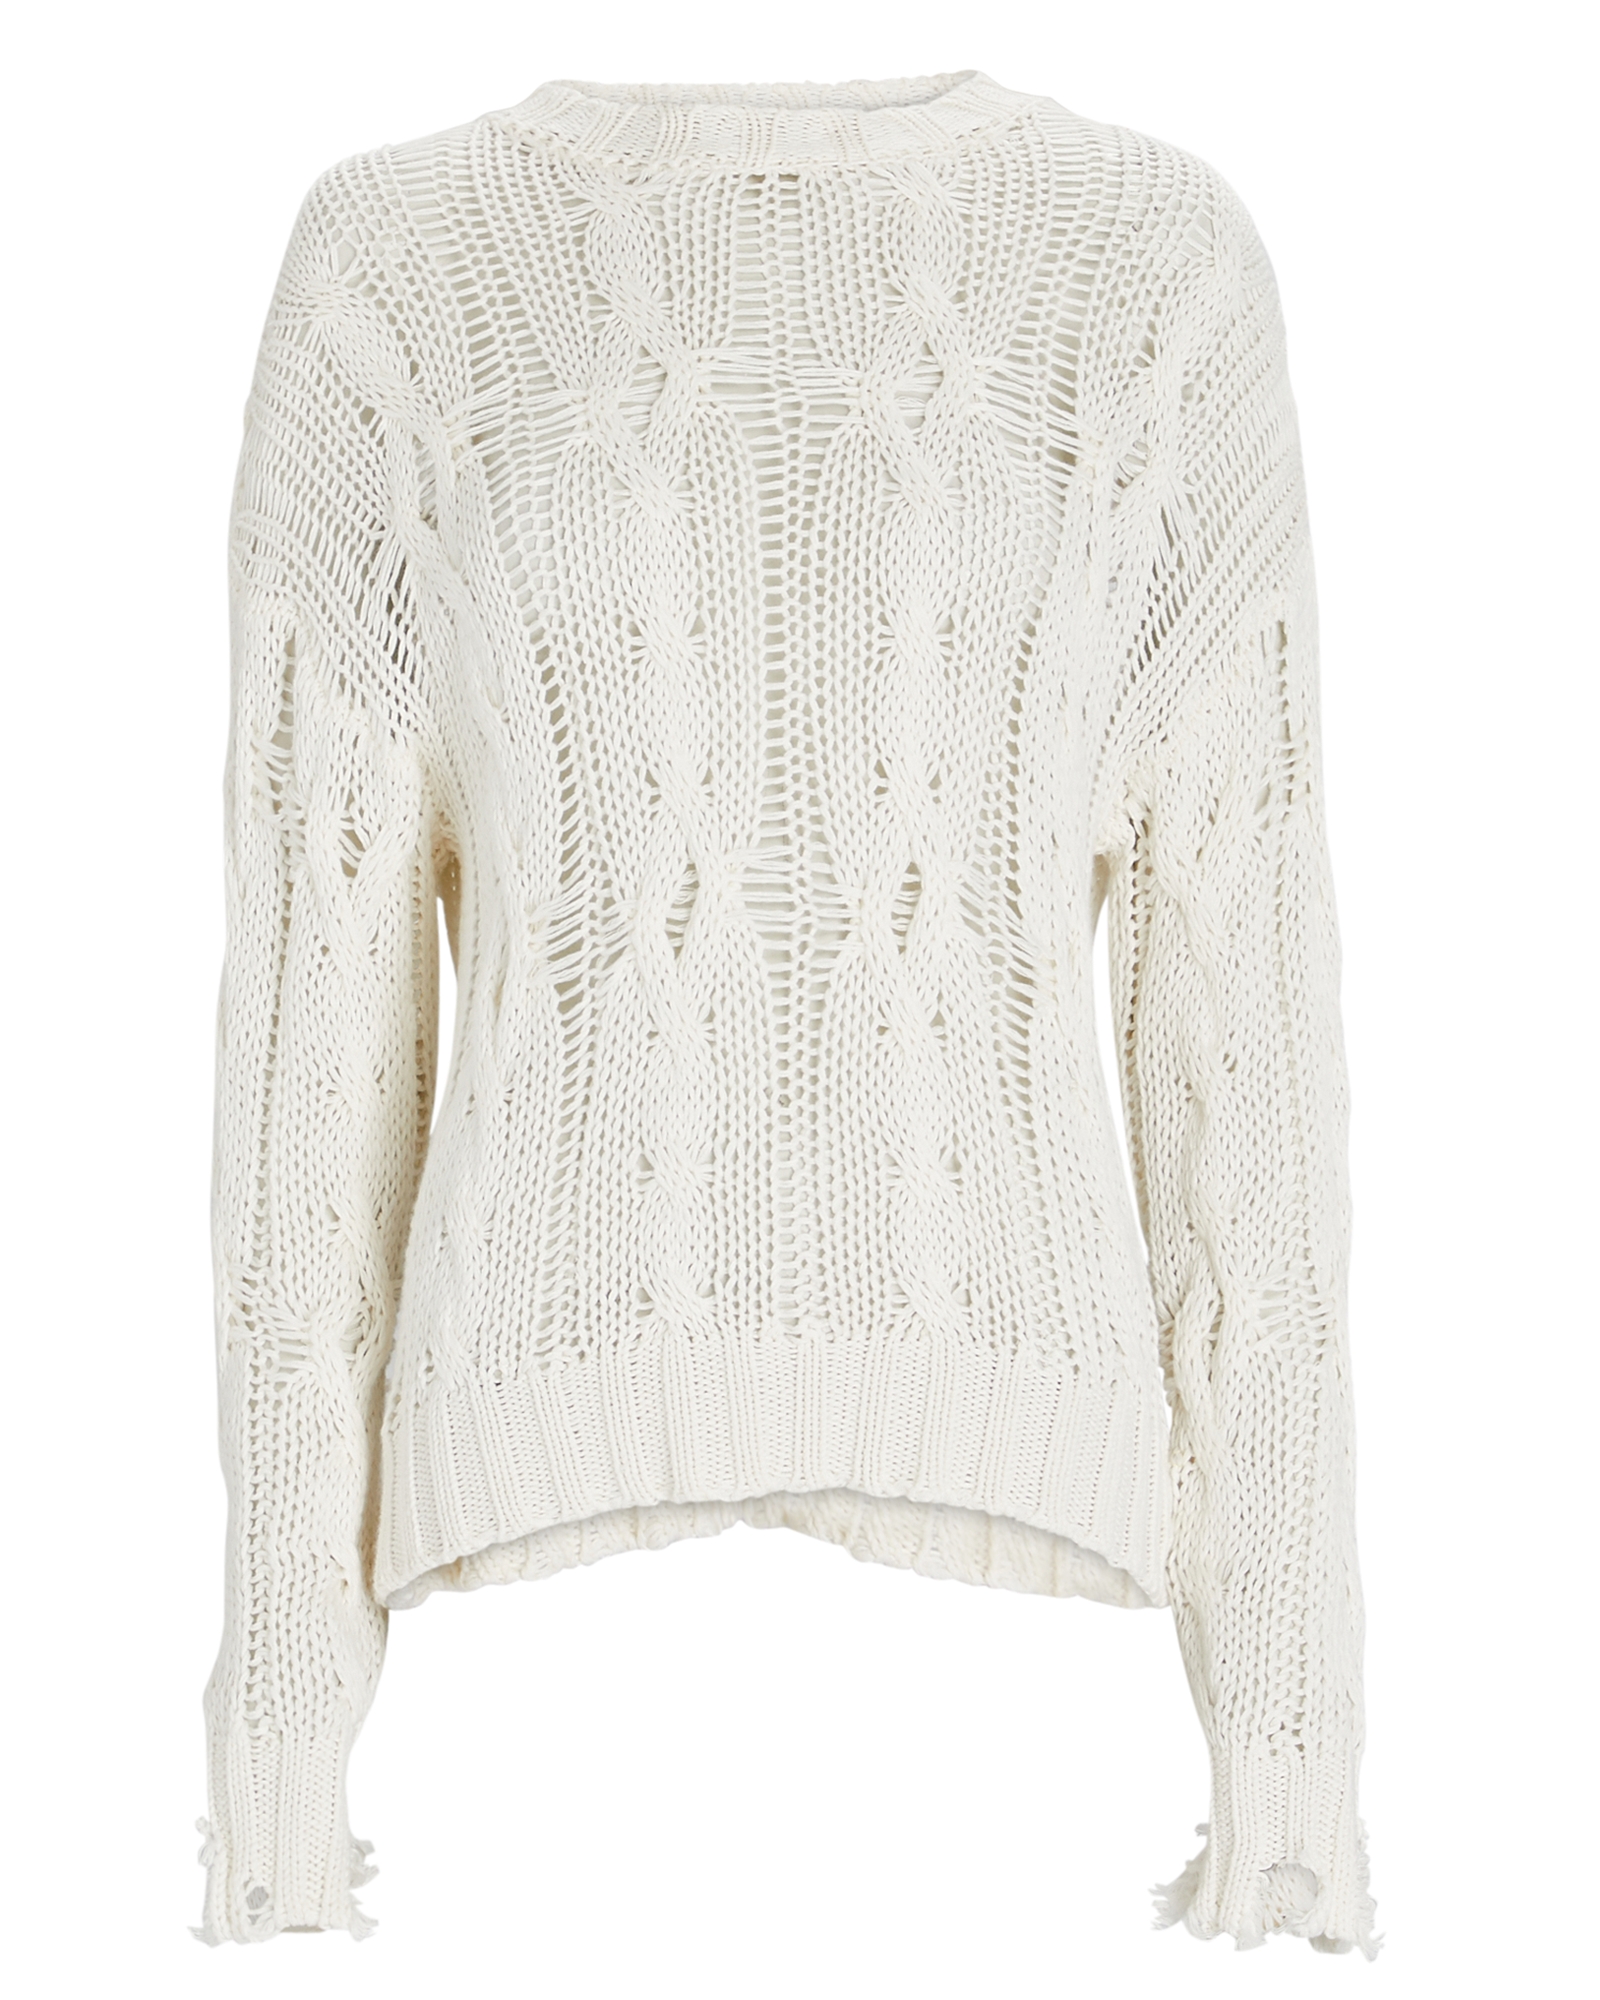 SABLYN Mitzy Distressed Cable Knit Sweater | INTERMIX®